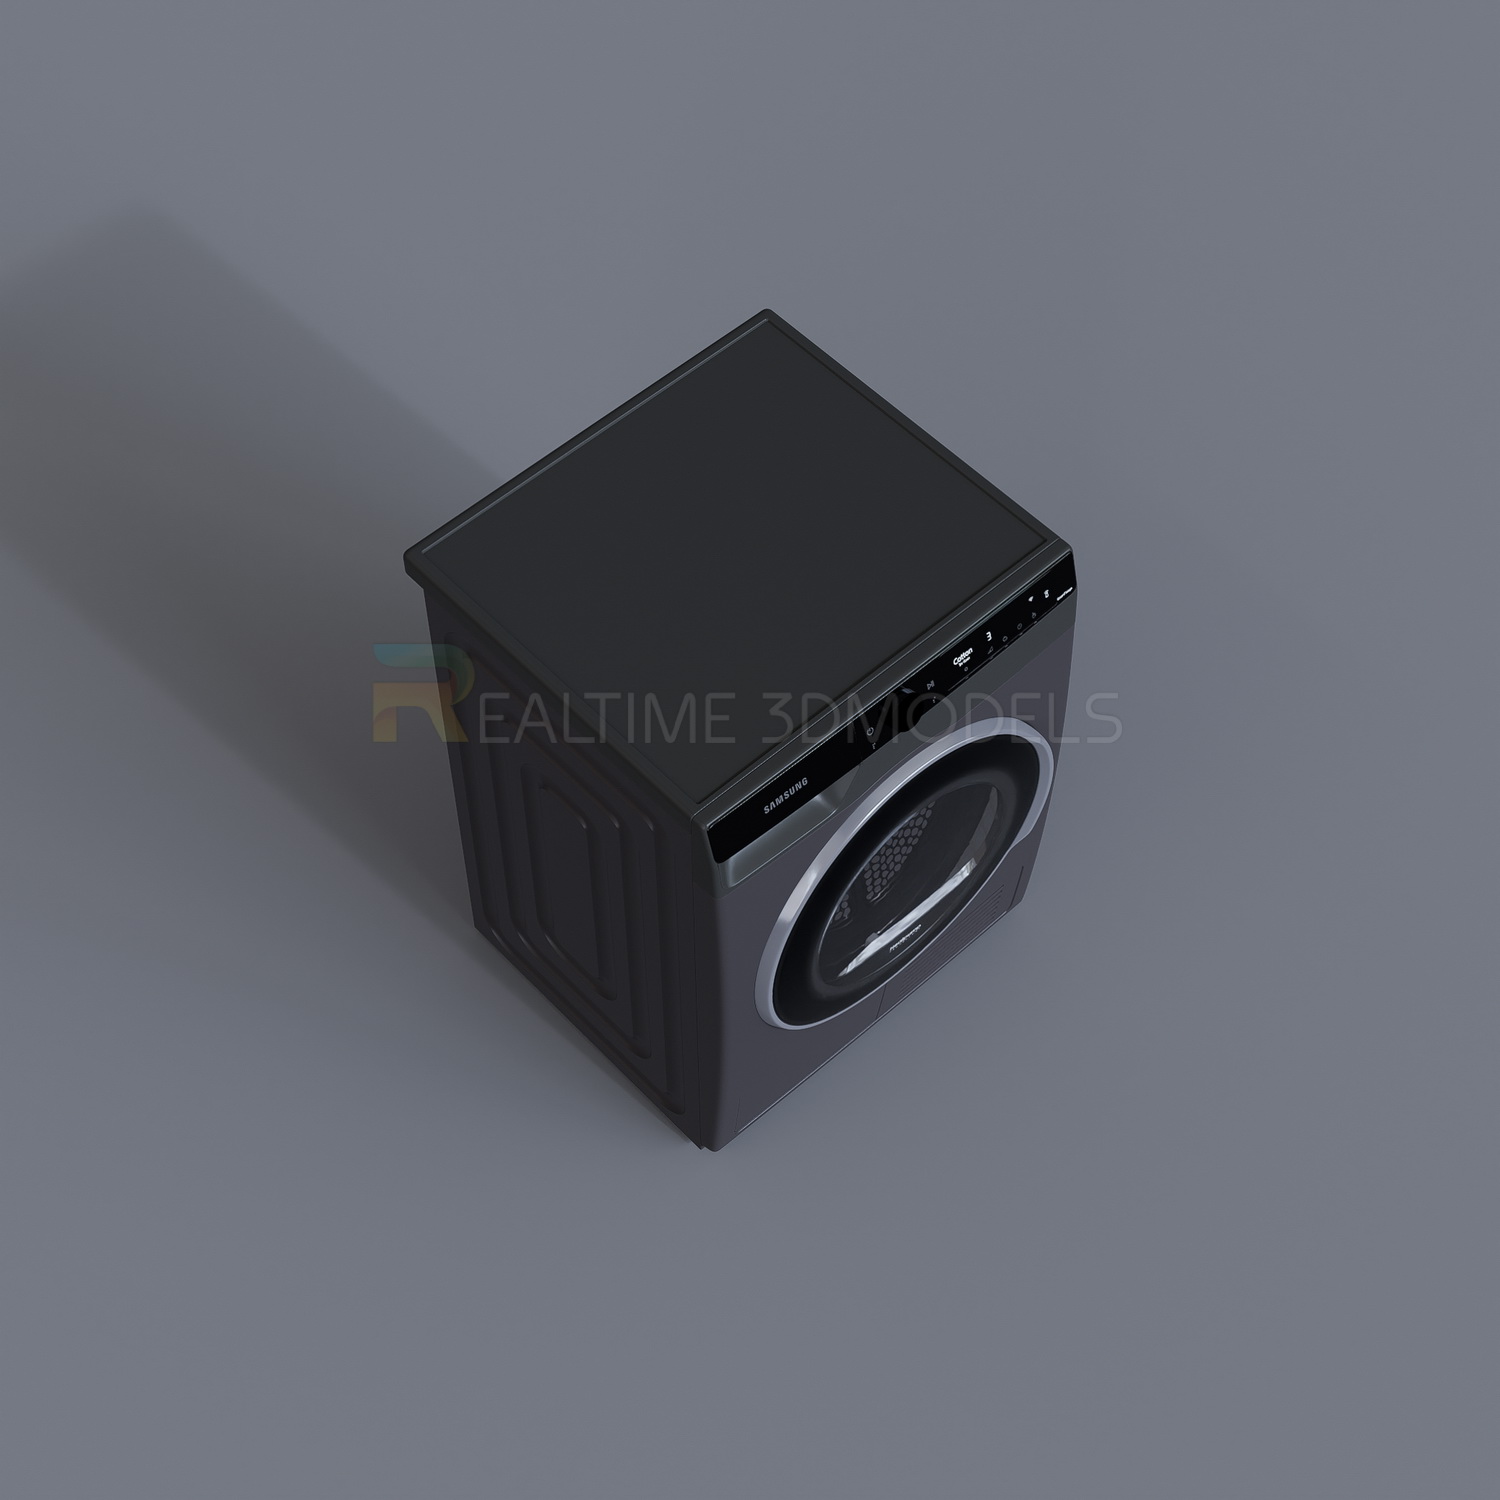 Realtime3d-00965